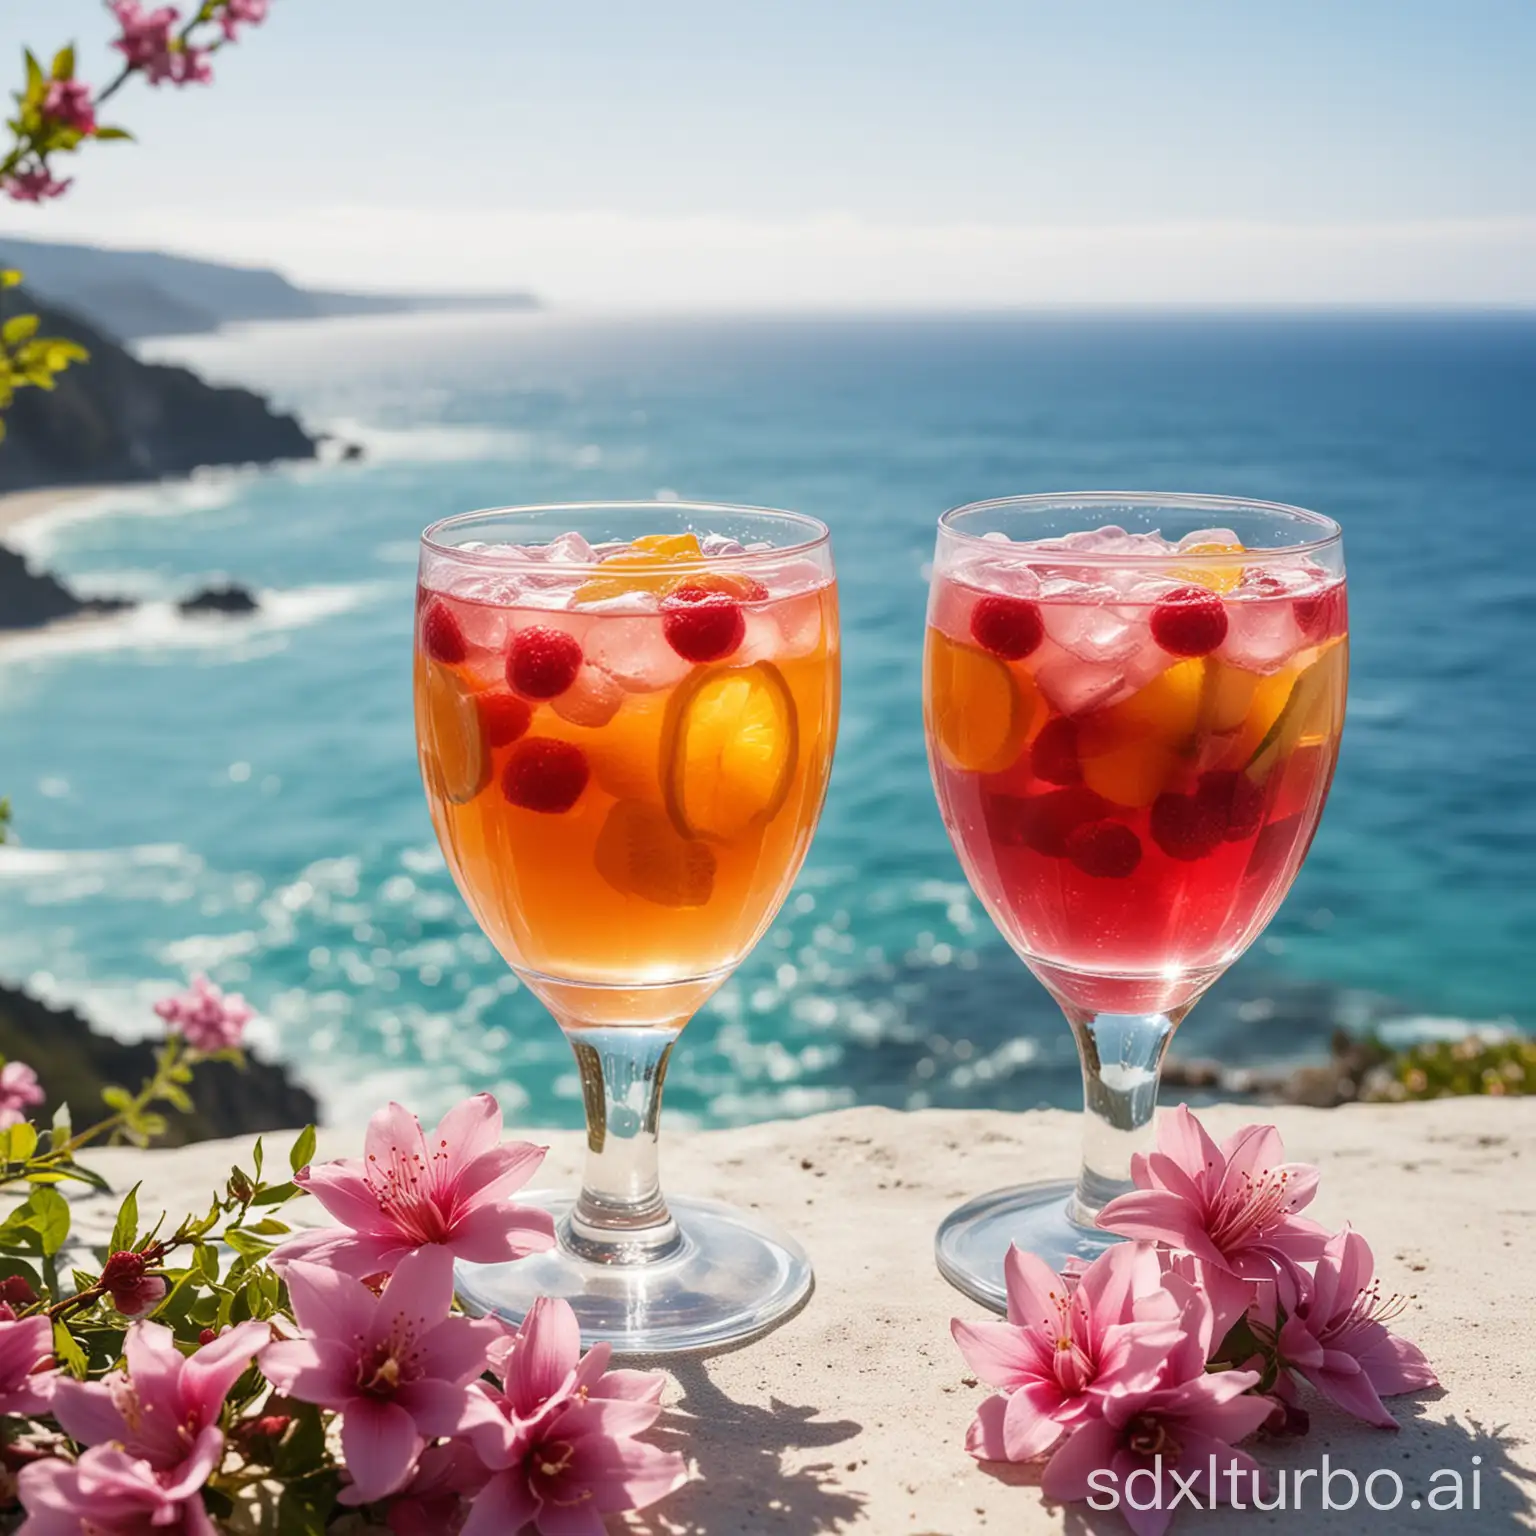 Two transparent cups filled with fruit drinks, sparkling and clear, with a background of ocean filled with beautiful flowers.